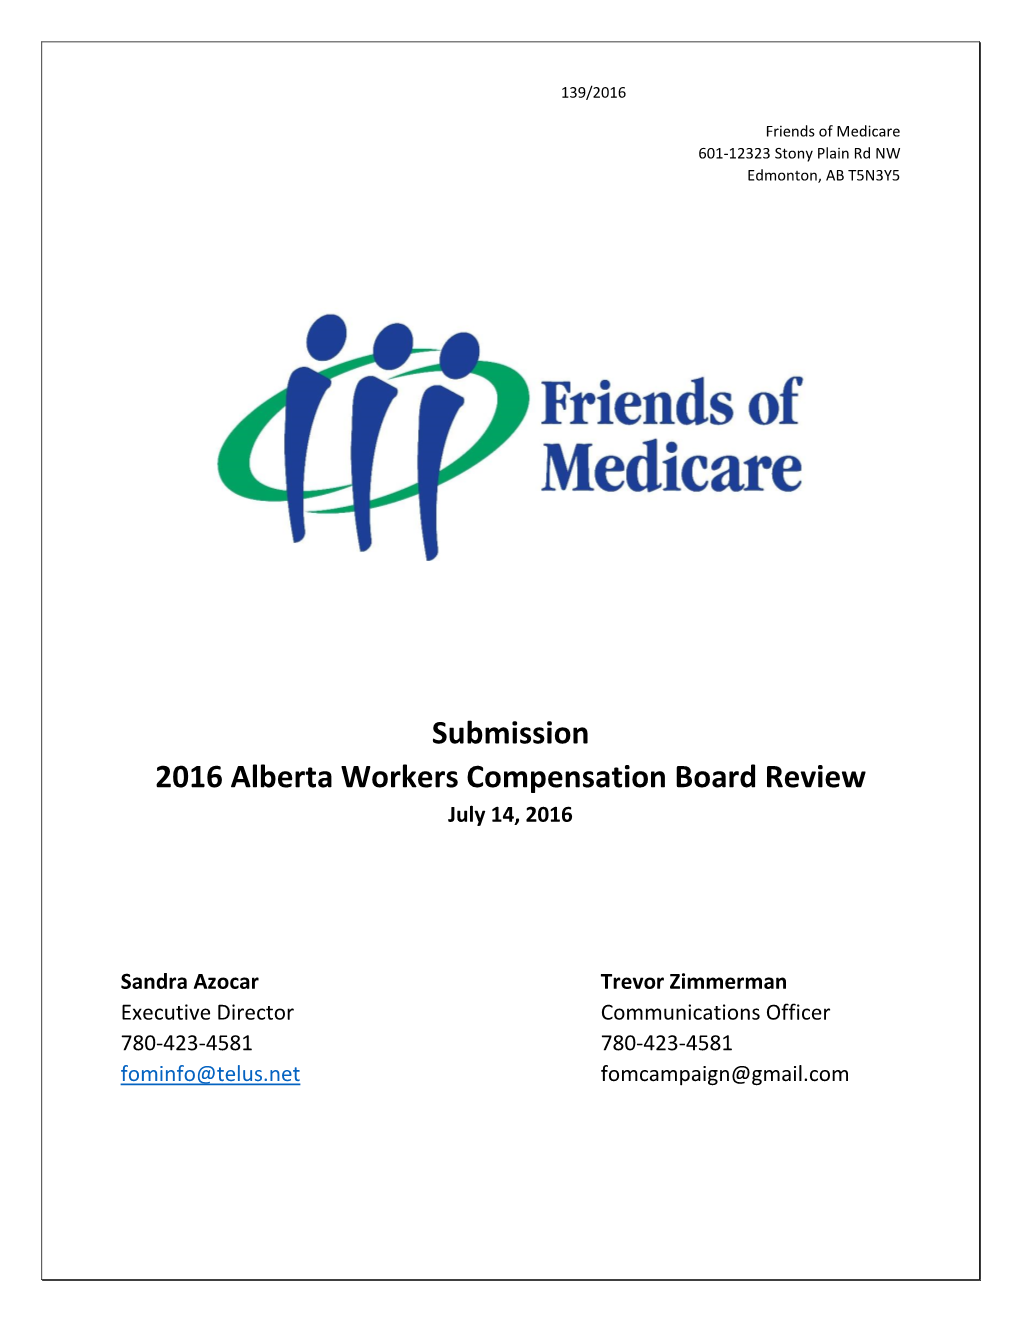 Submission 2016 Alberta Workers Compensation Board Review July 14, 2016